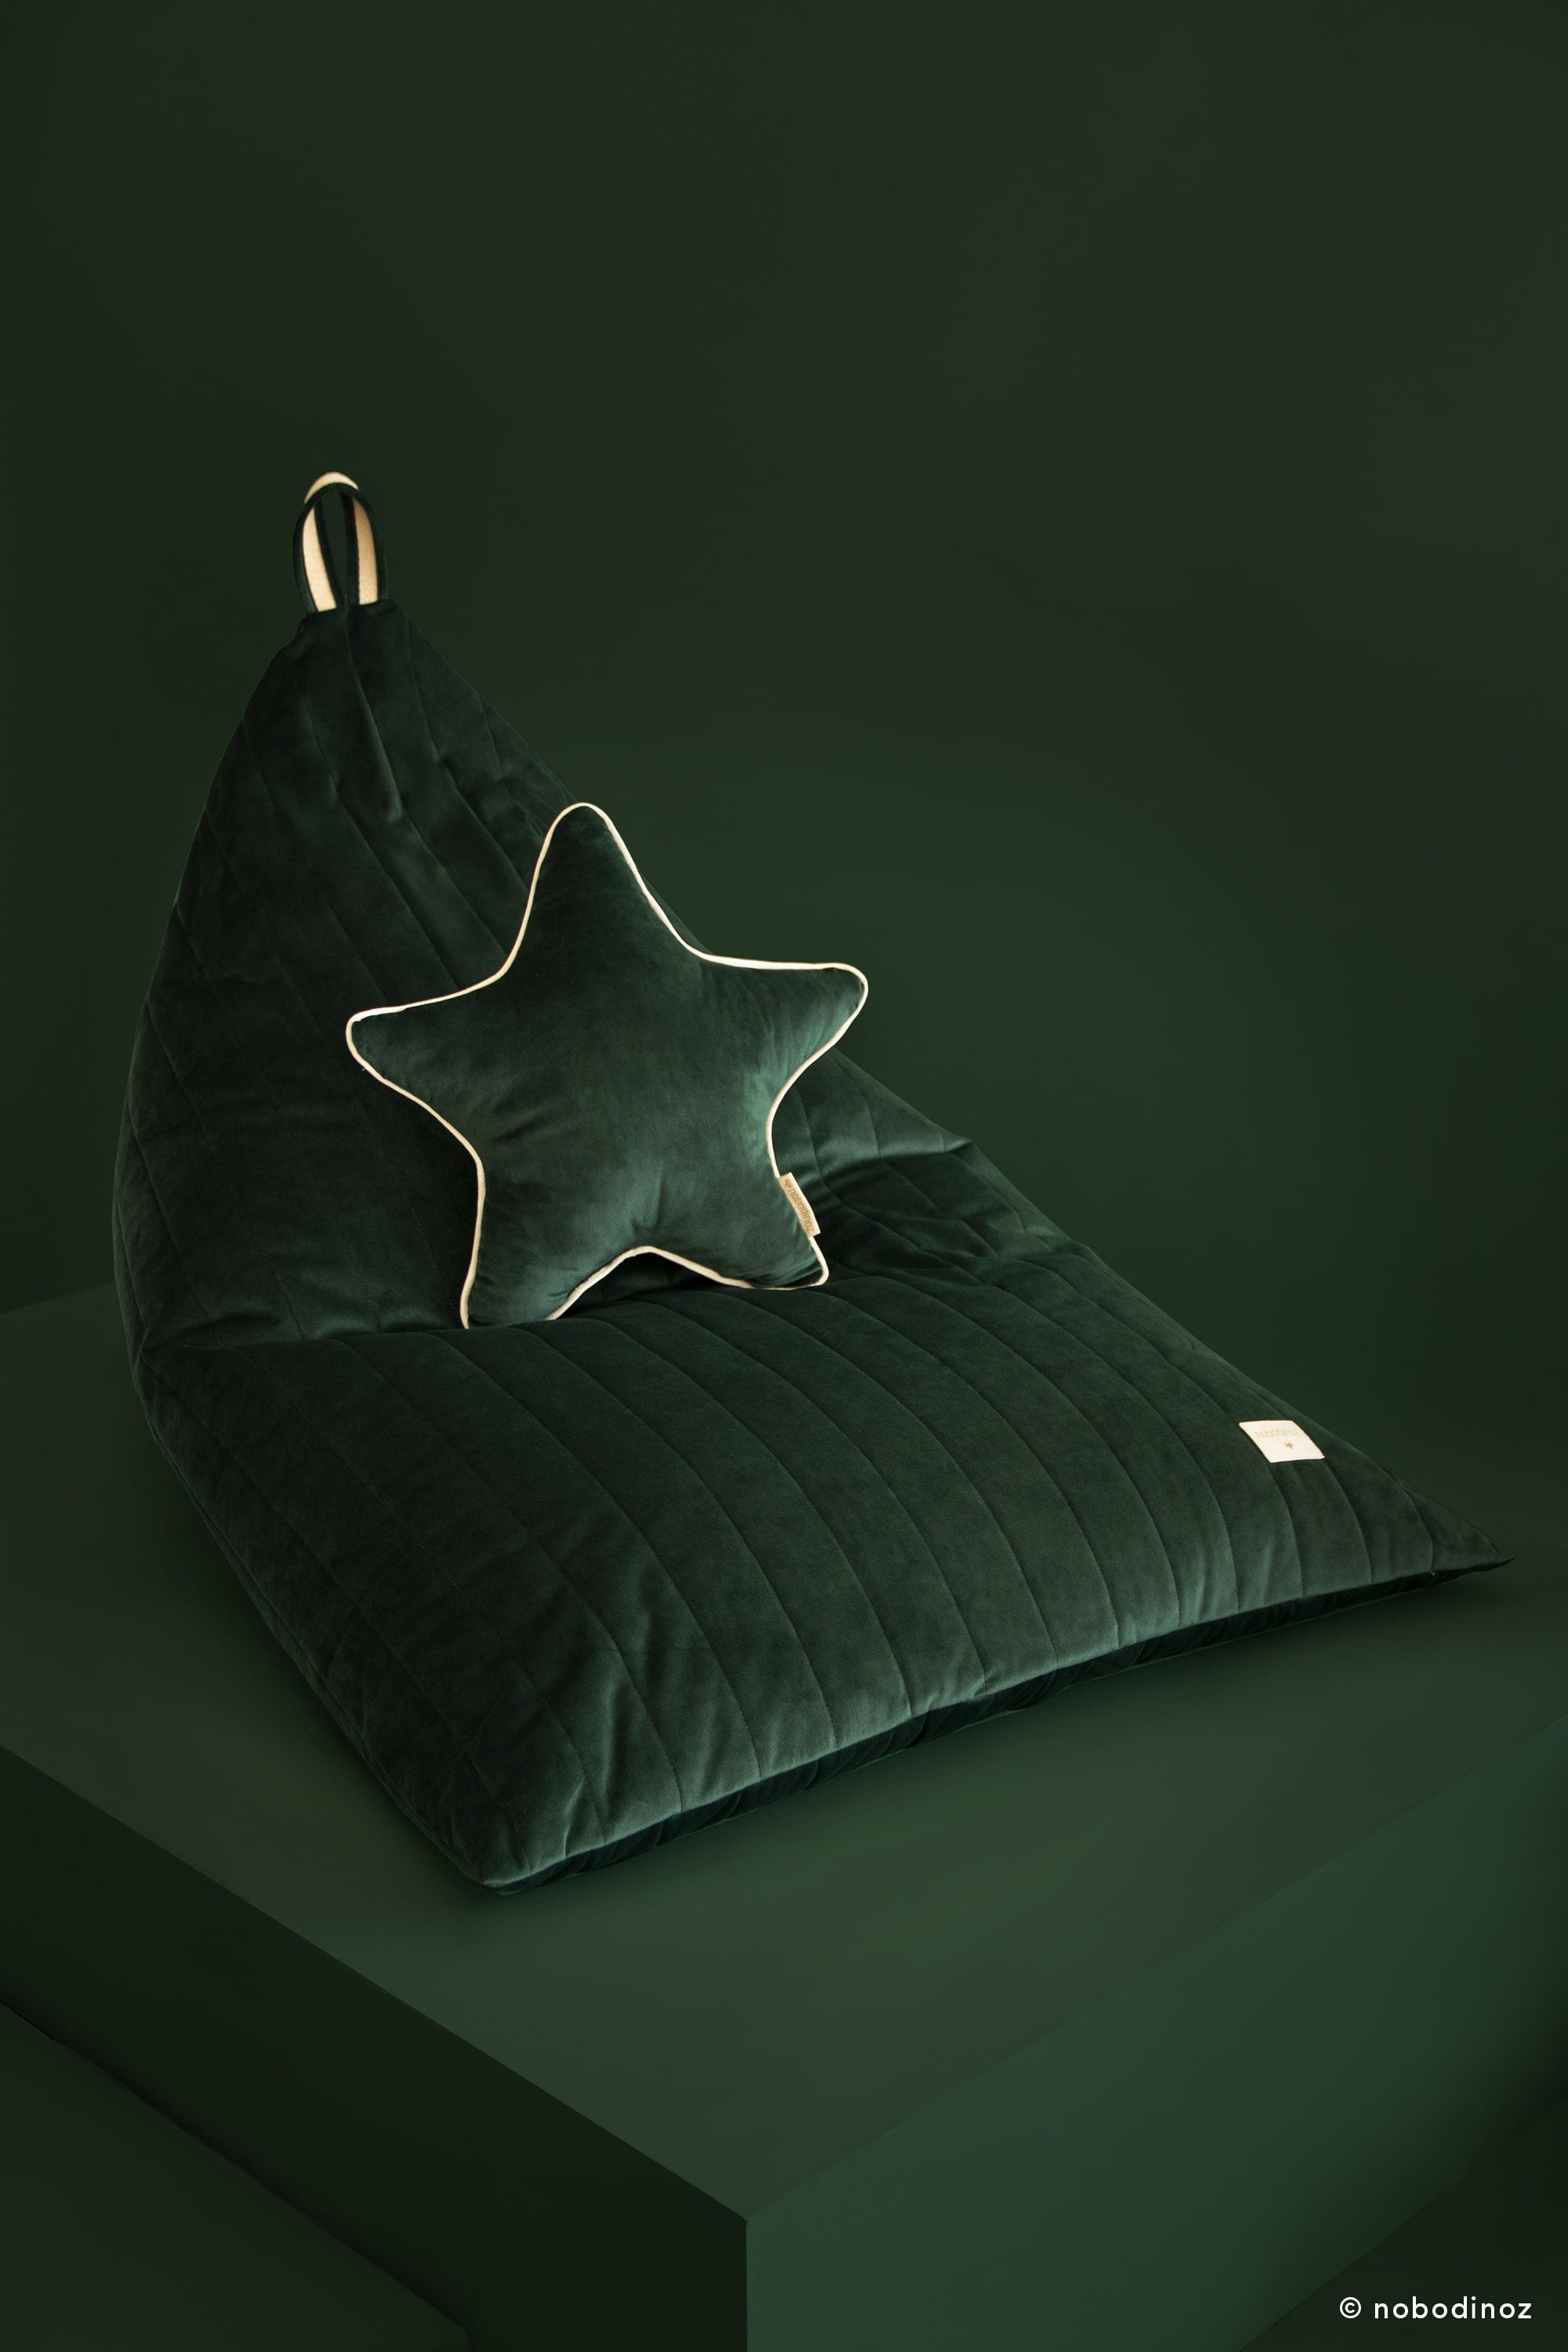 Deer Industries Singapore, Nobodinoz Singapore, Kids Bean Bag Singapore, Kids Pouf Singapore, Bean Bag with removable cover, velvet green bean bag